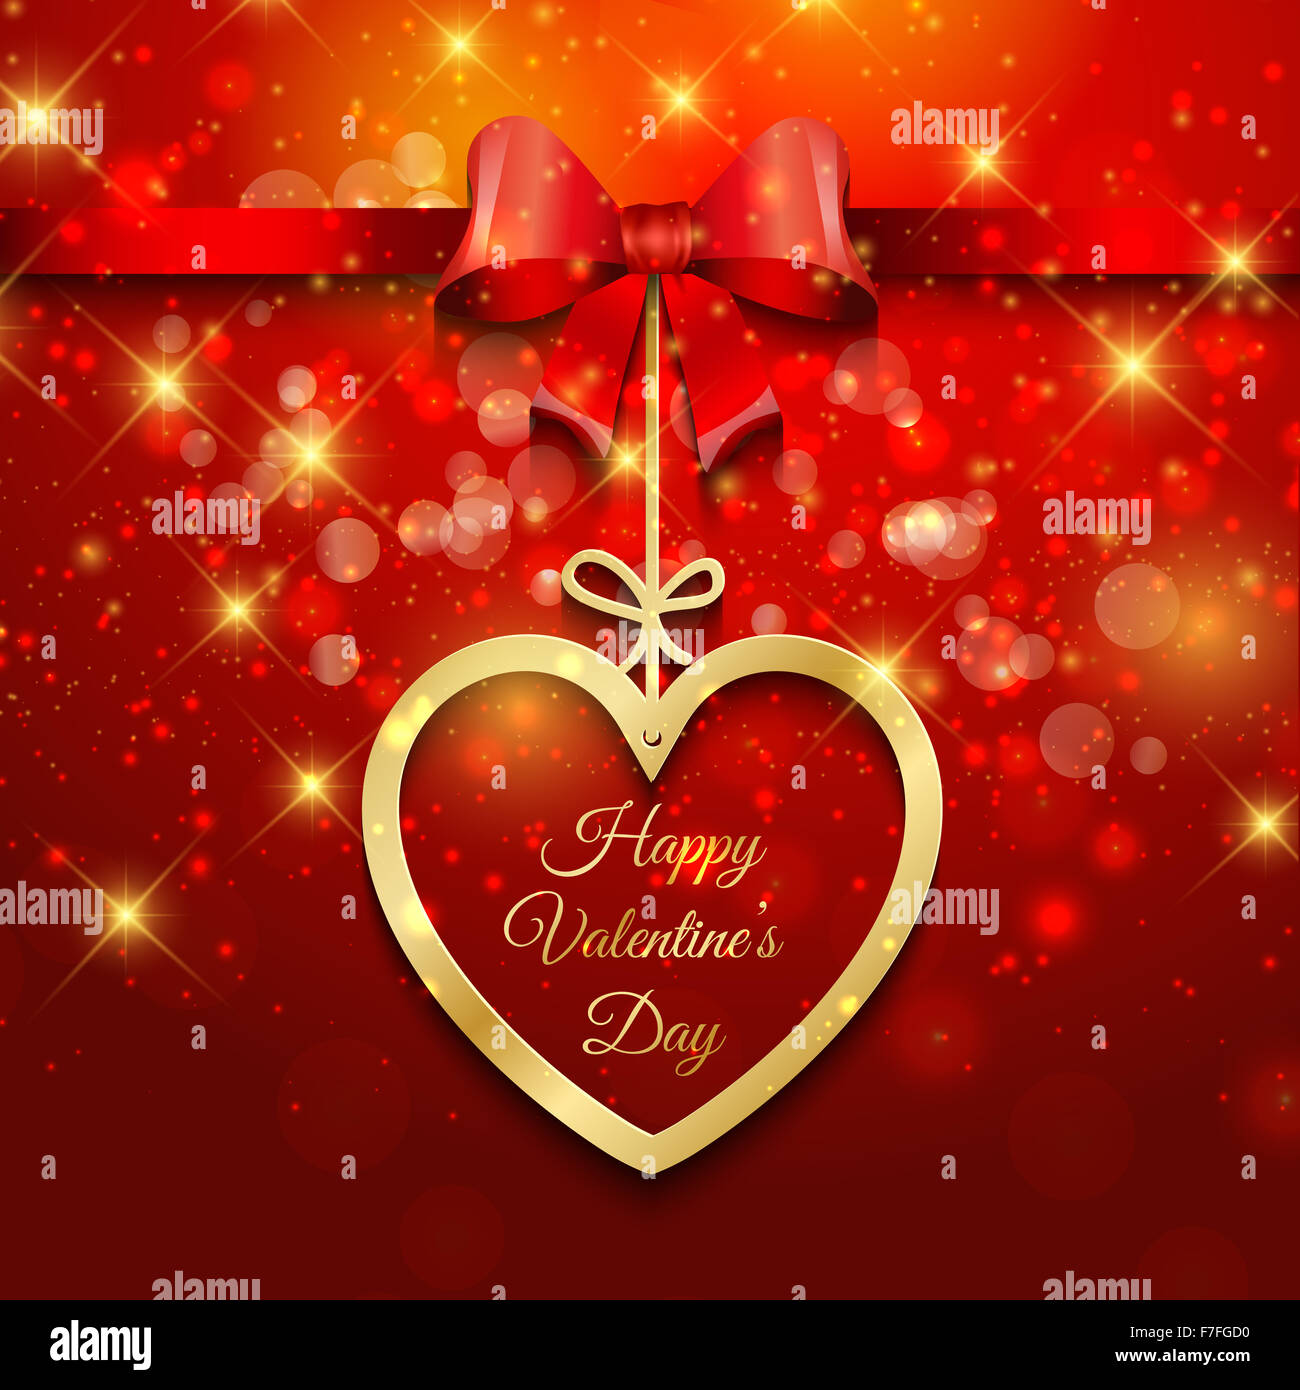 Valentine's Day background with hanging heart and ribbon Stock Photo